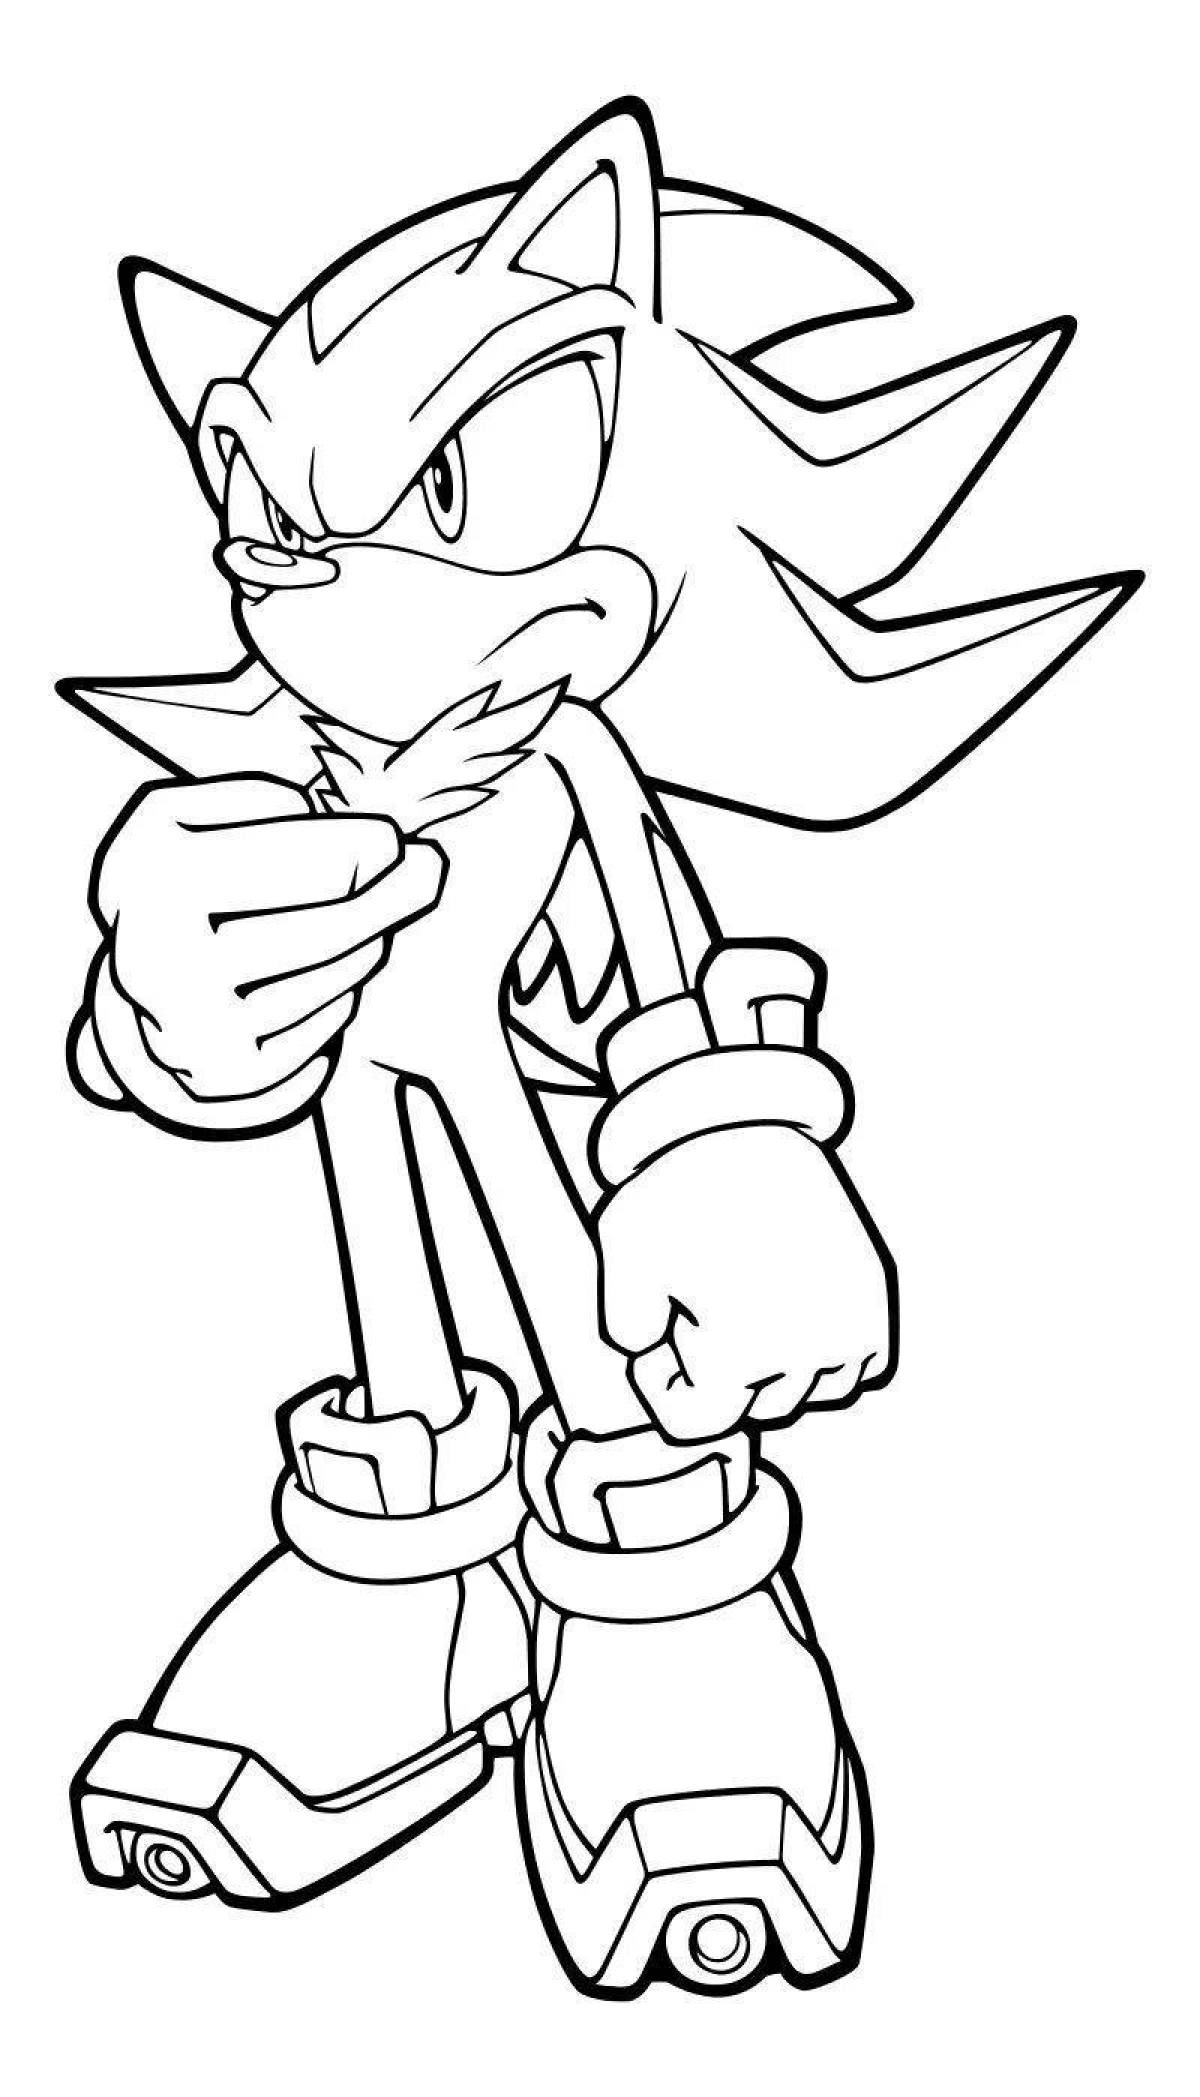 Playful minecraft sonic coloring page